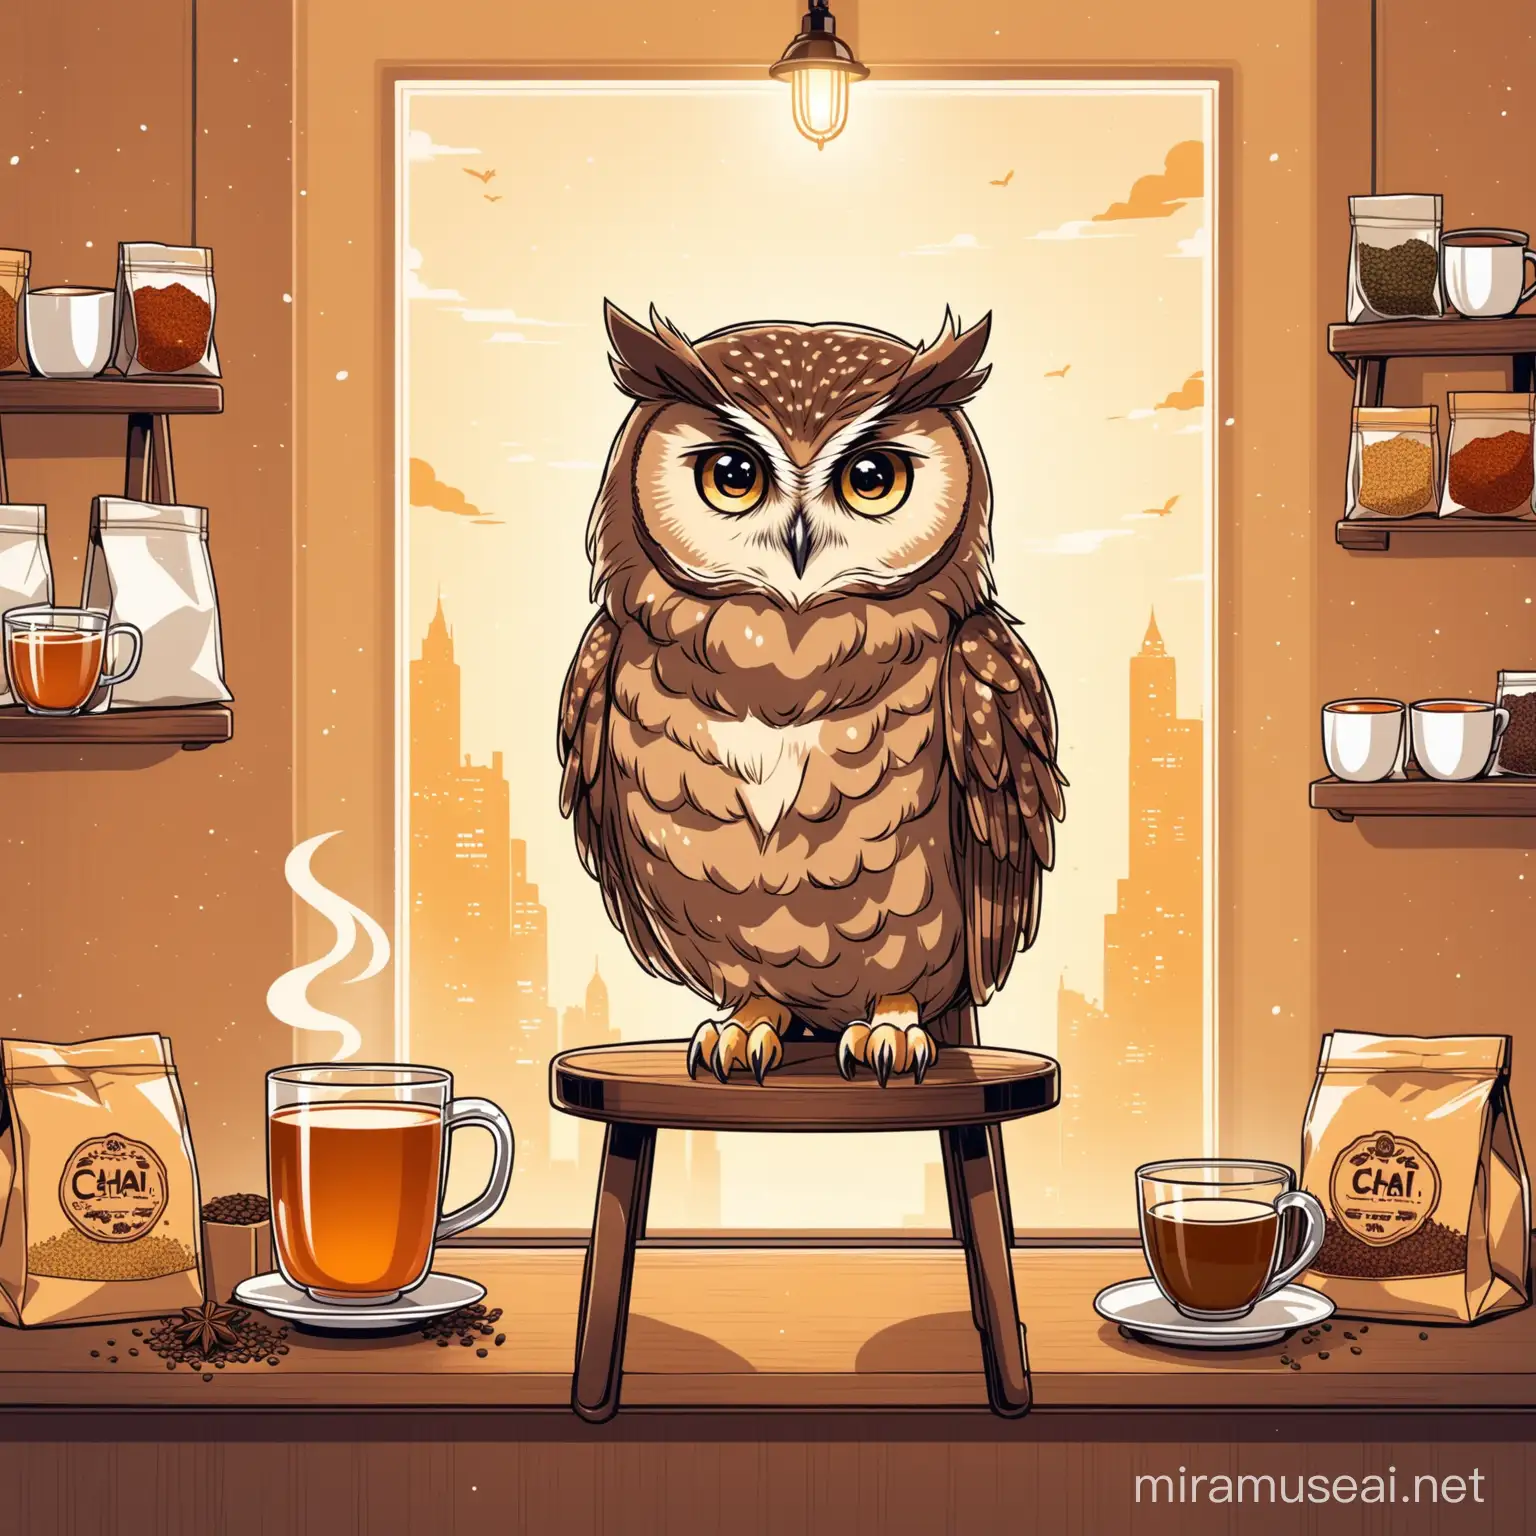 An owl, on a barstool, with a cup of tea, chai spices in open bags around the background, in a simple art style